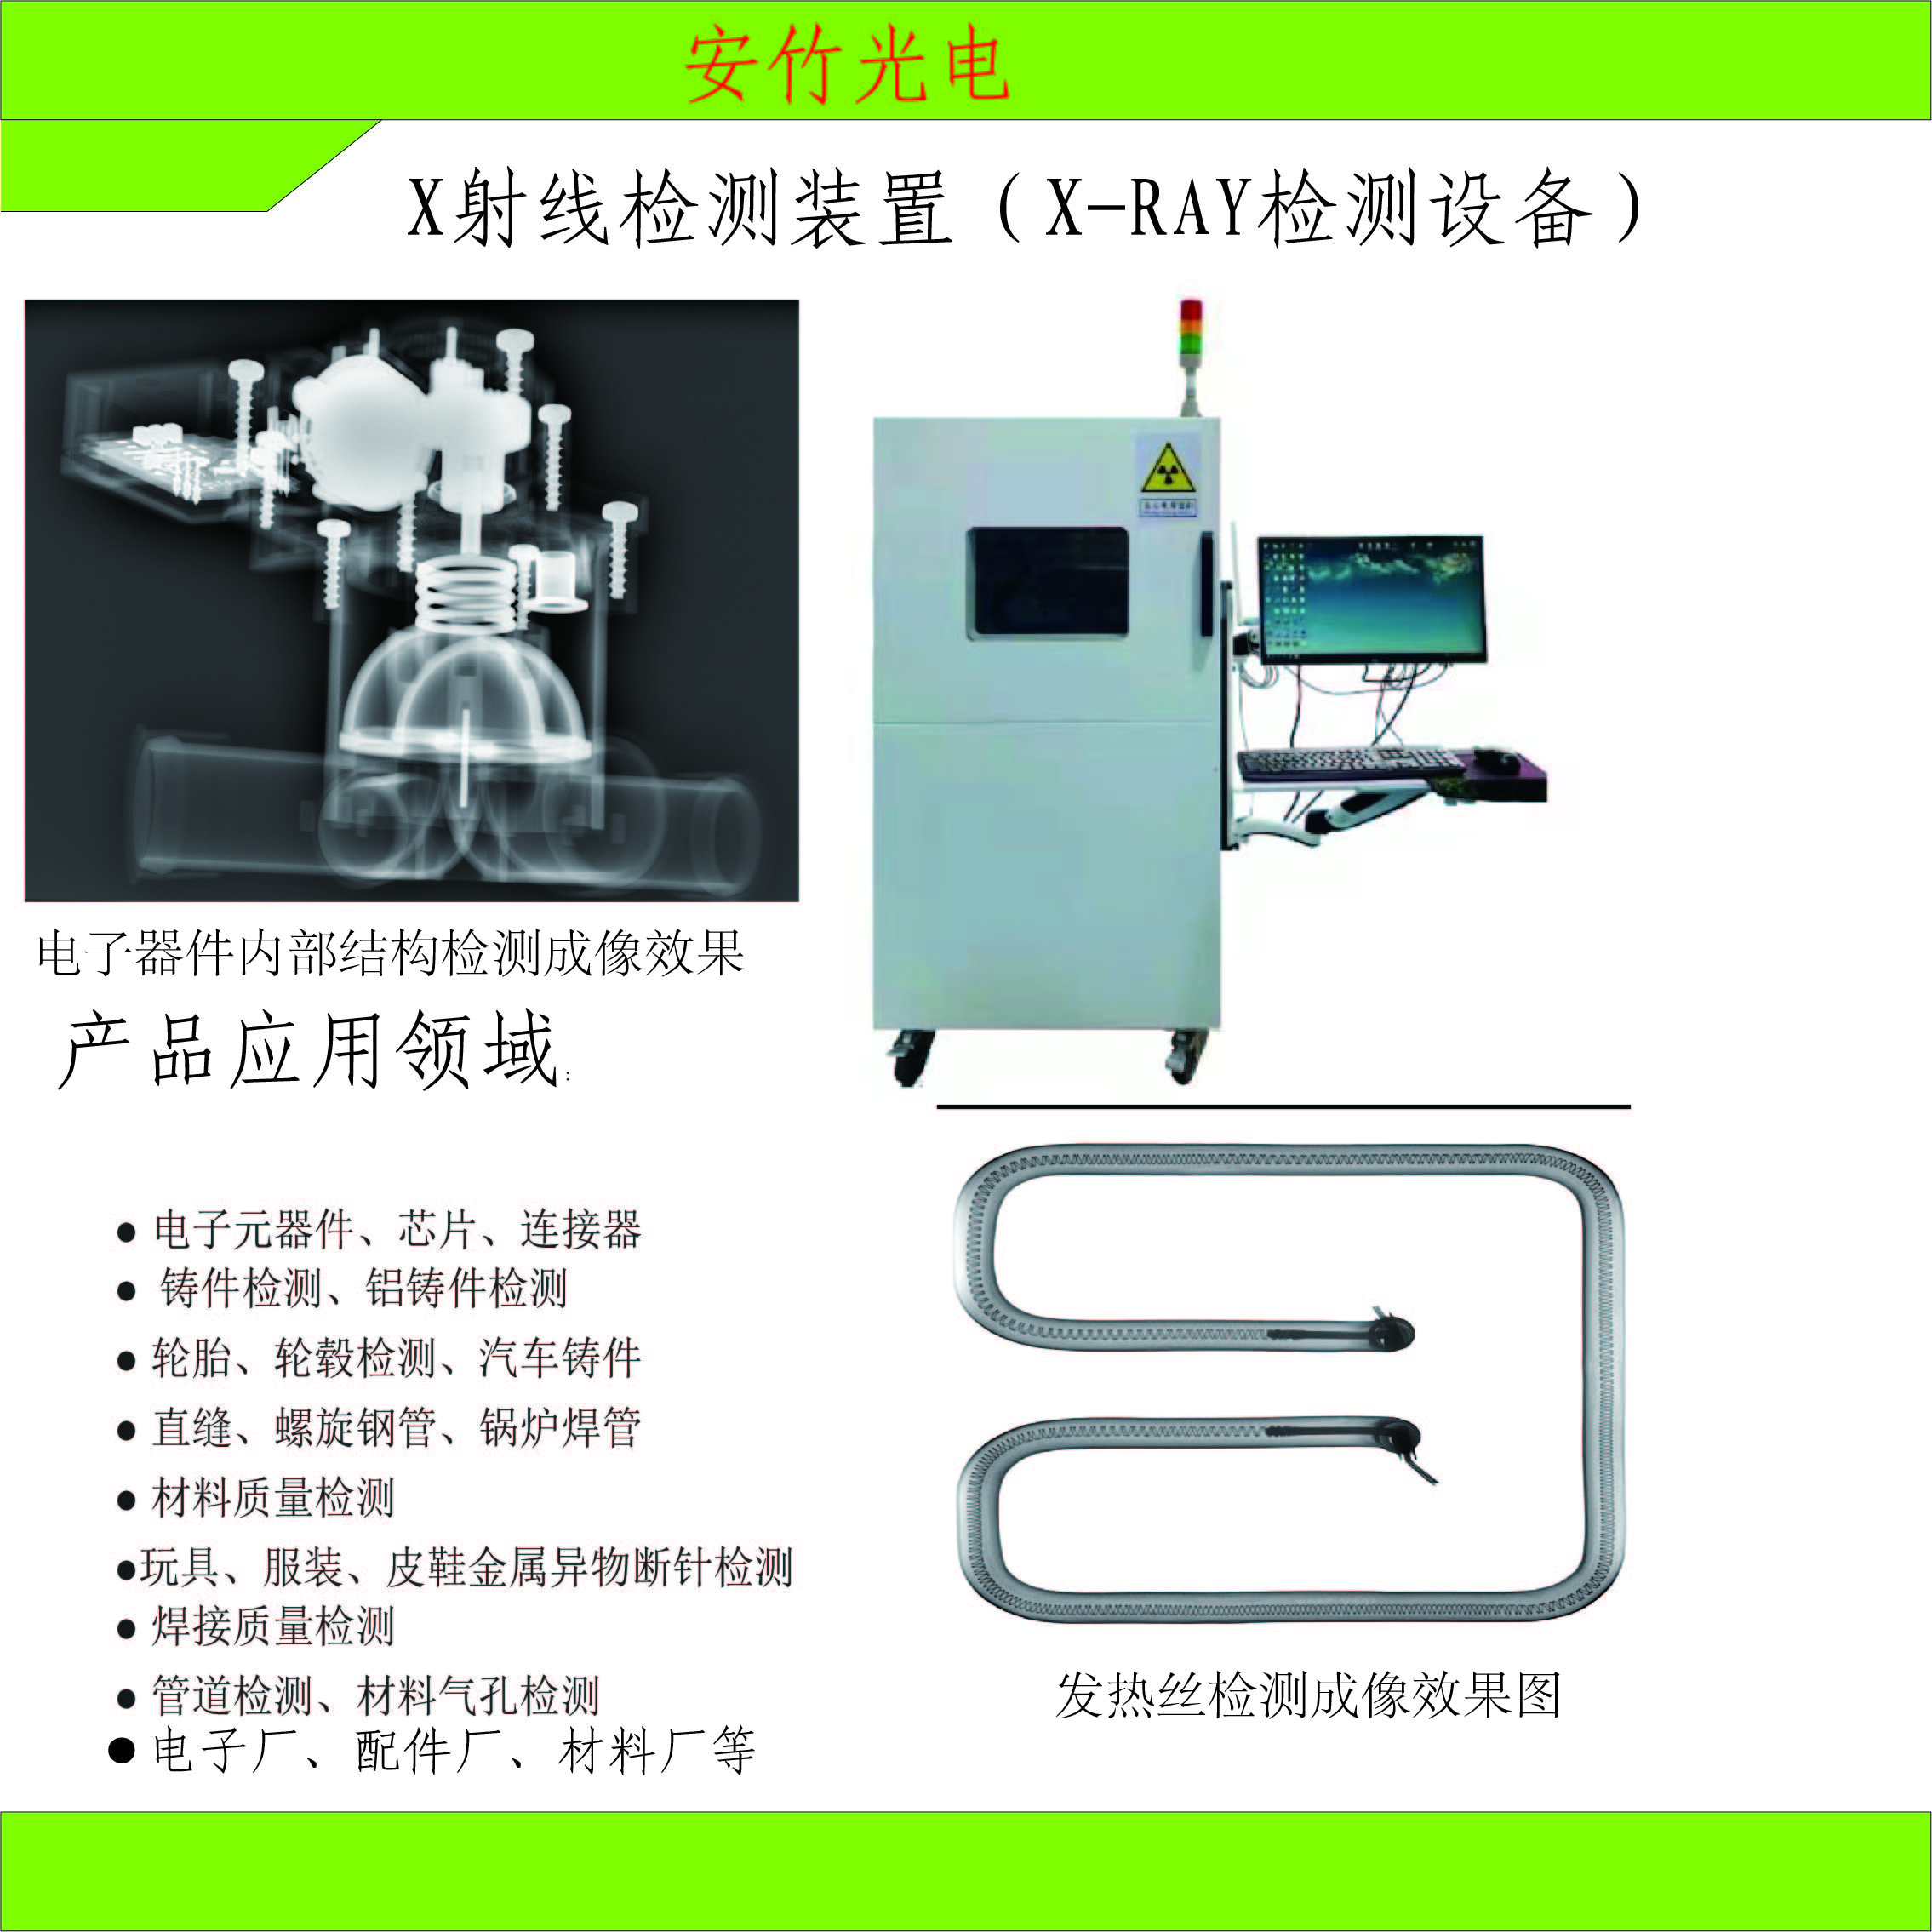 X-RAY non-destructive X-ray generator testing equipment X-ray machine tester foreign matter detector